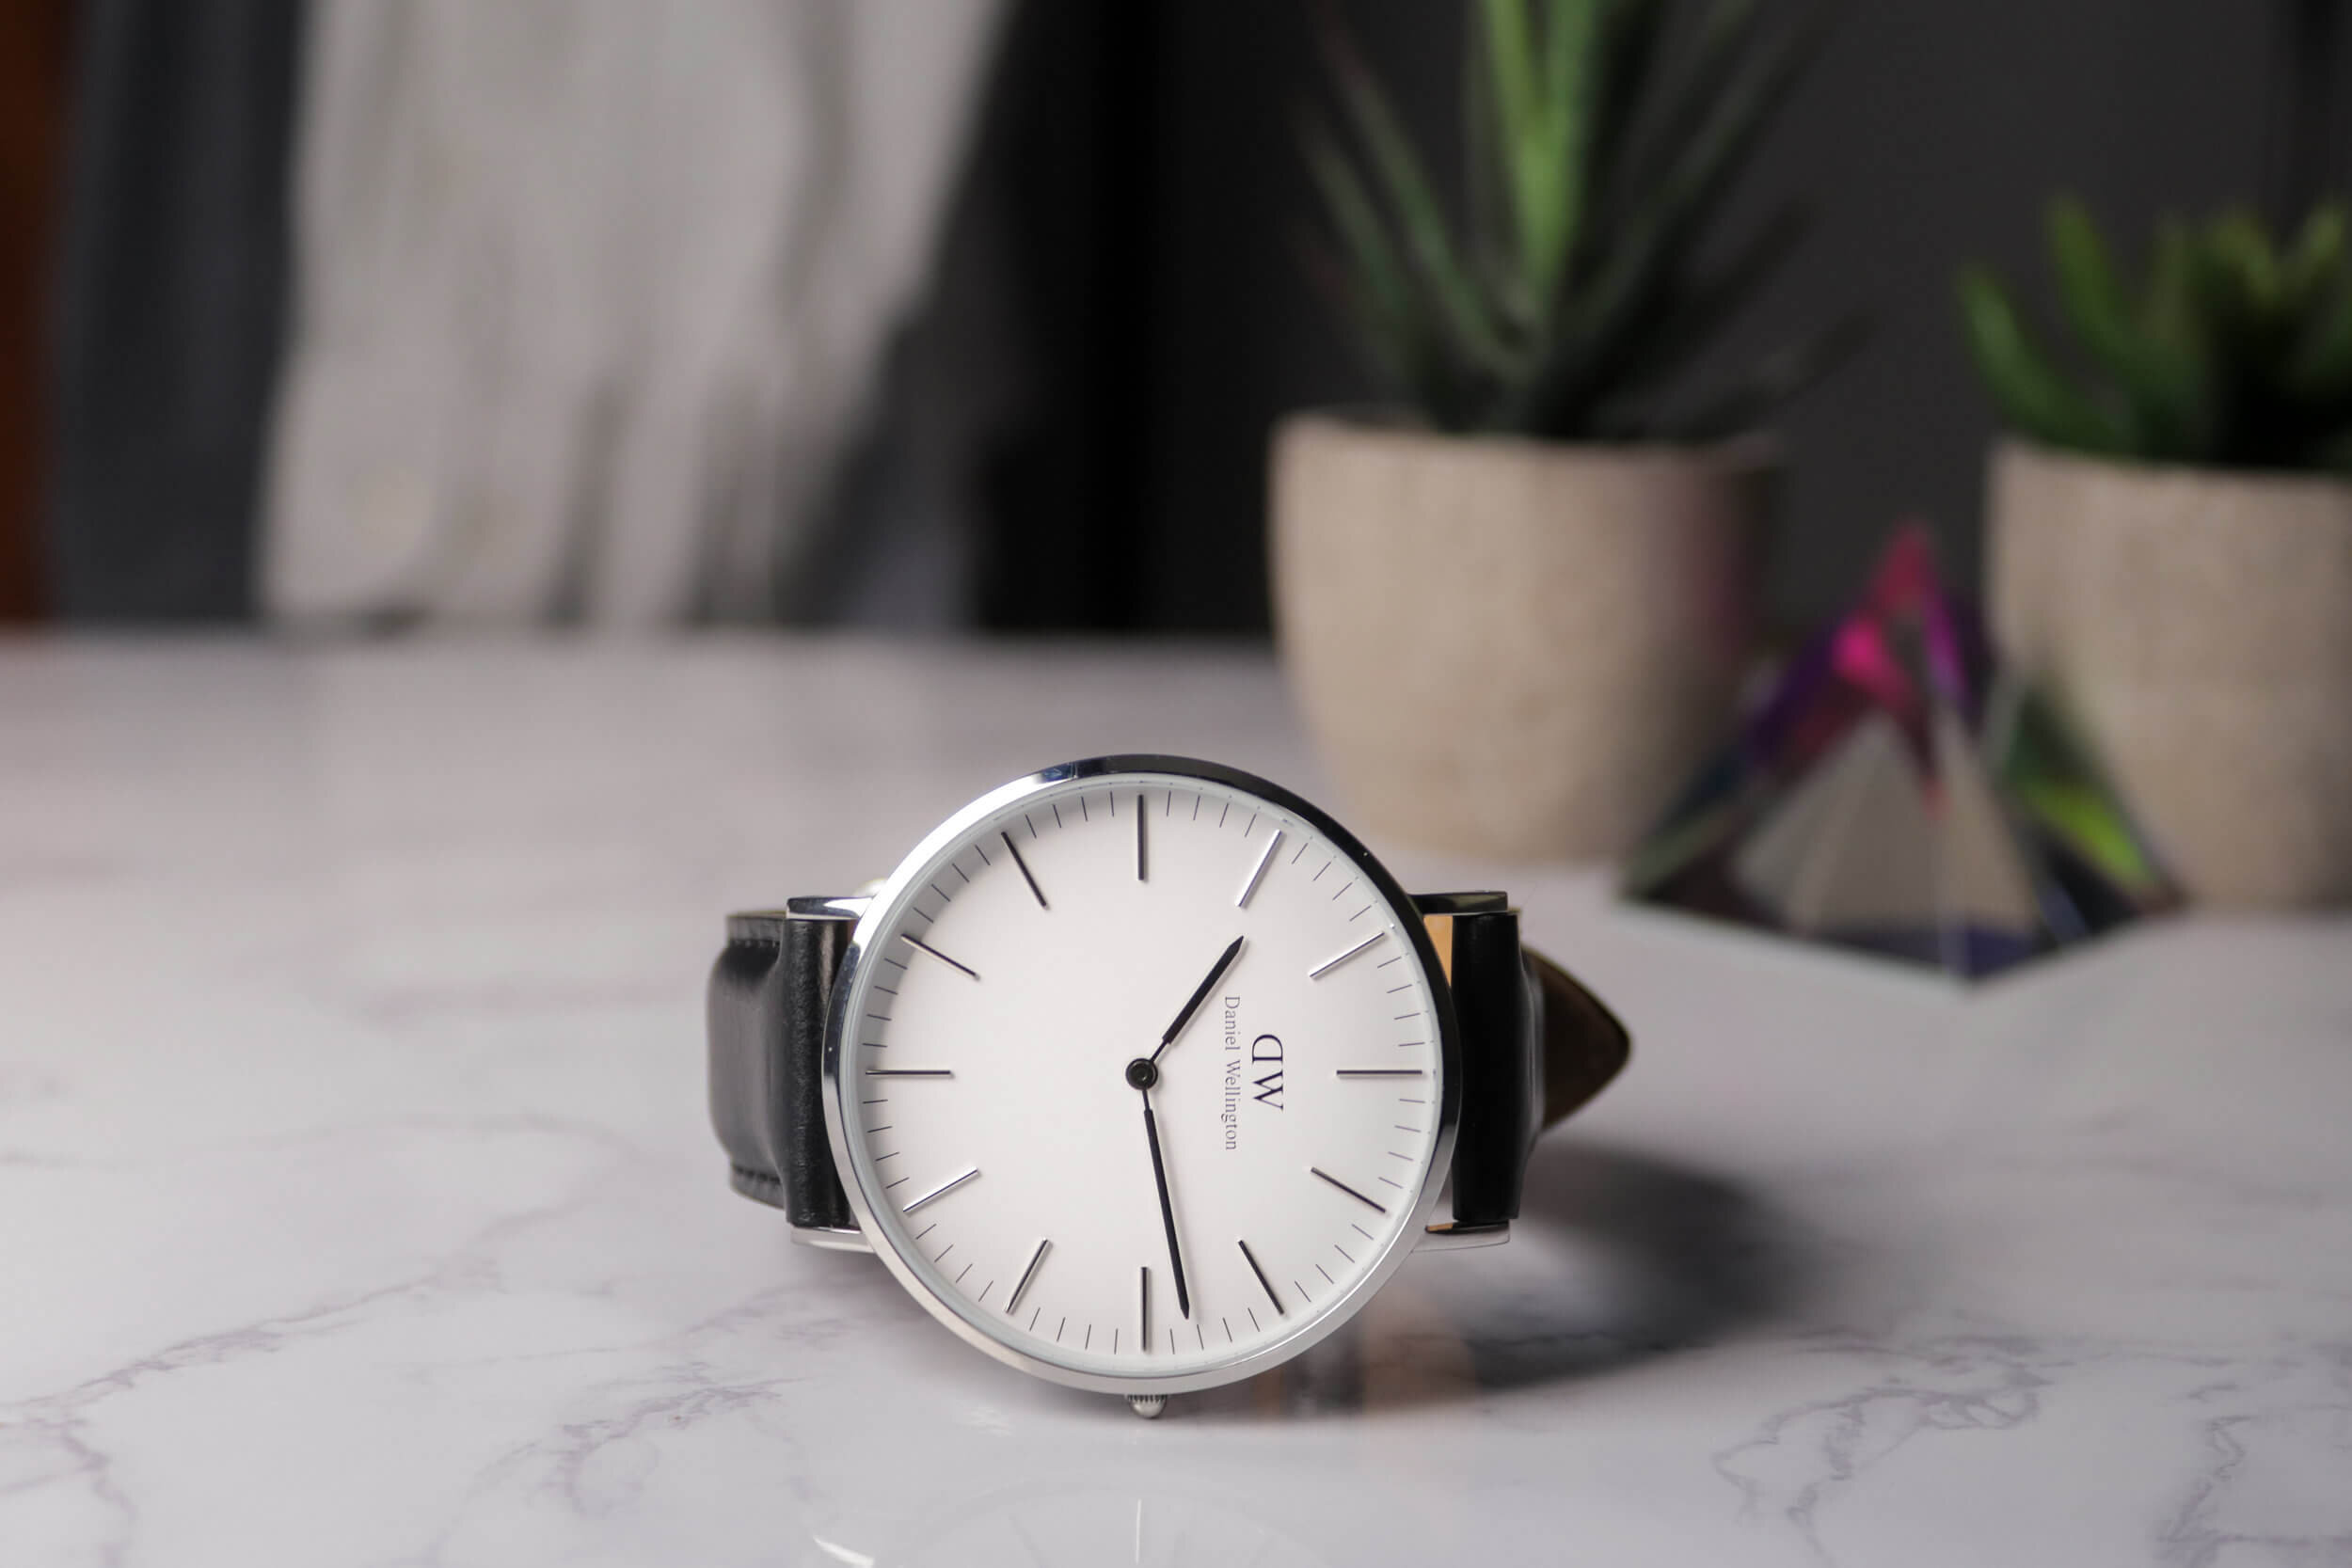 Nonsens besejret Udled Daniel Wellington Watch Review | Affordable Luxury Or Cheap Trash? — Ben's  Watch Club - Exploring Affordable Watches